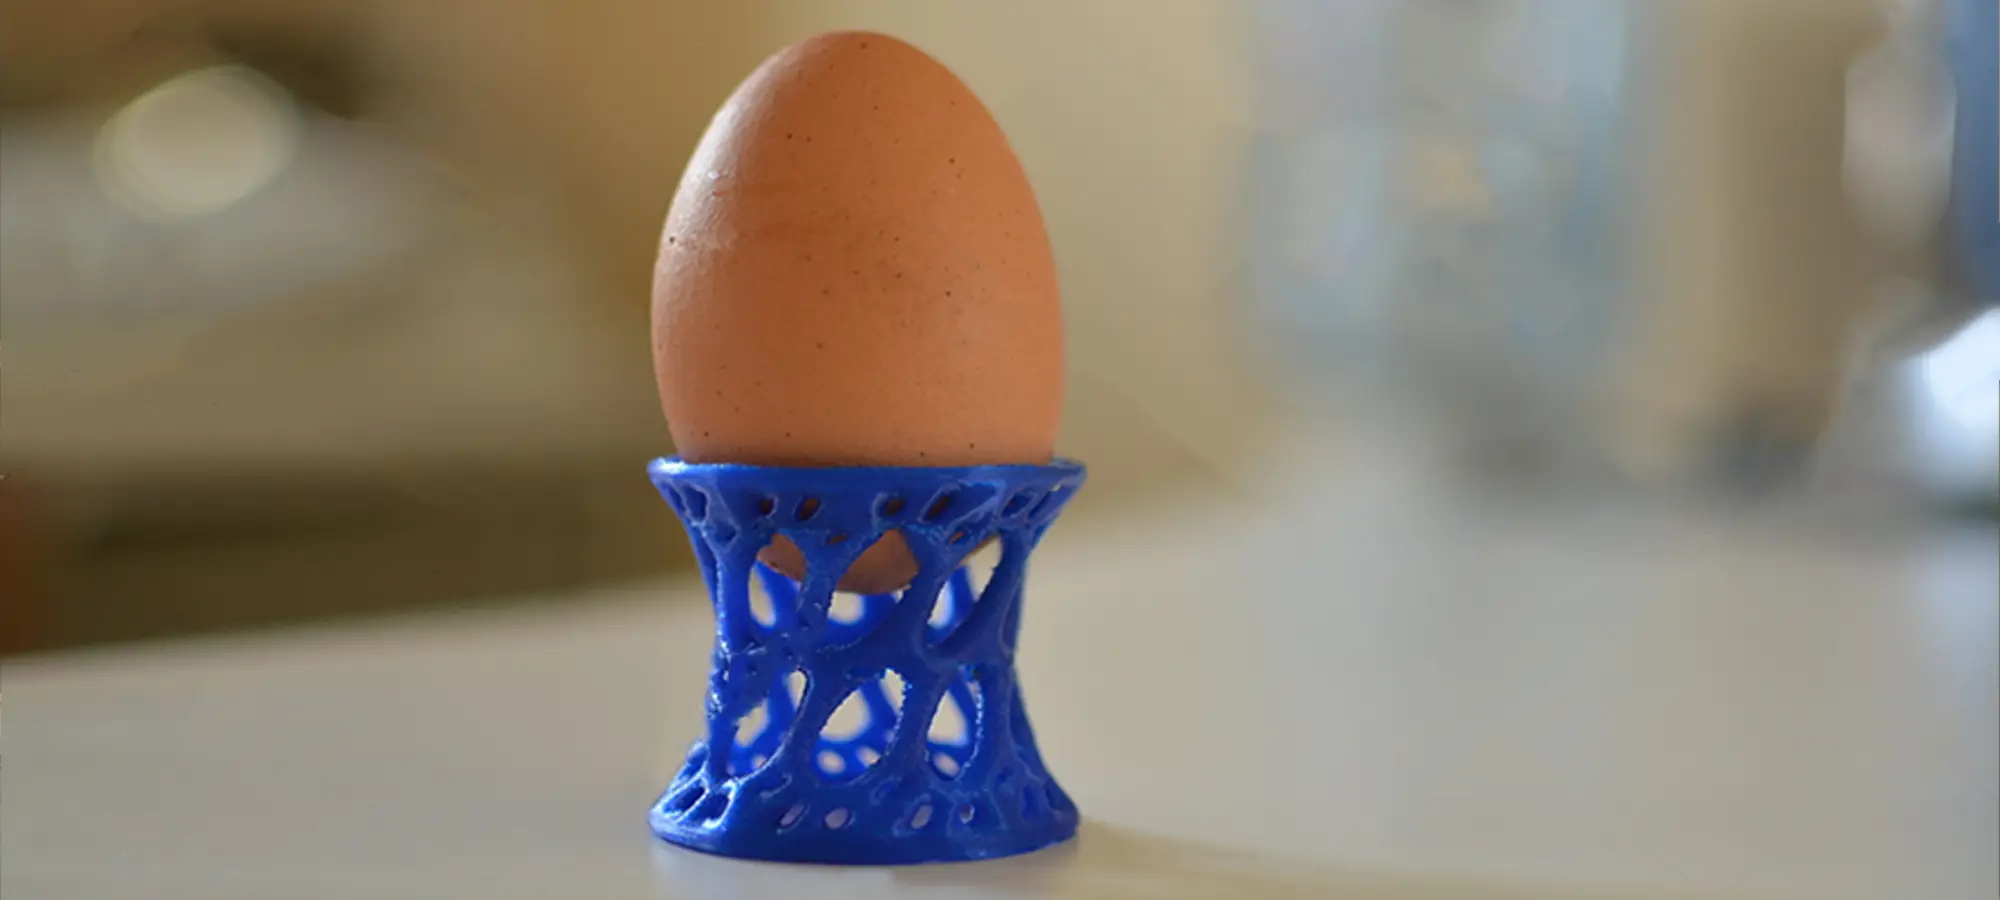 household items 3D printed